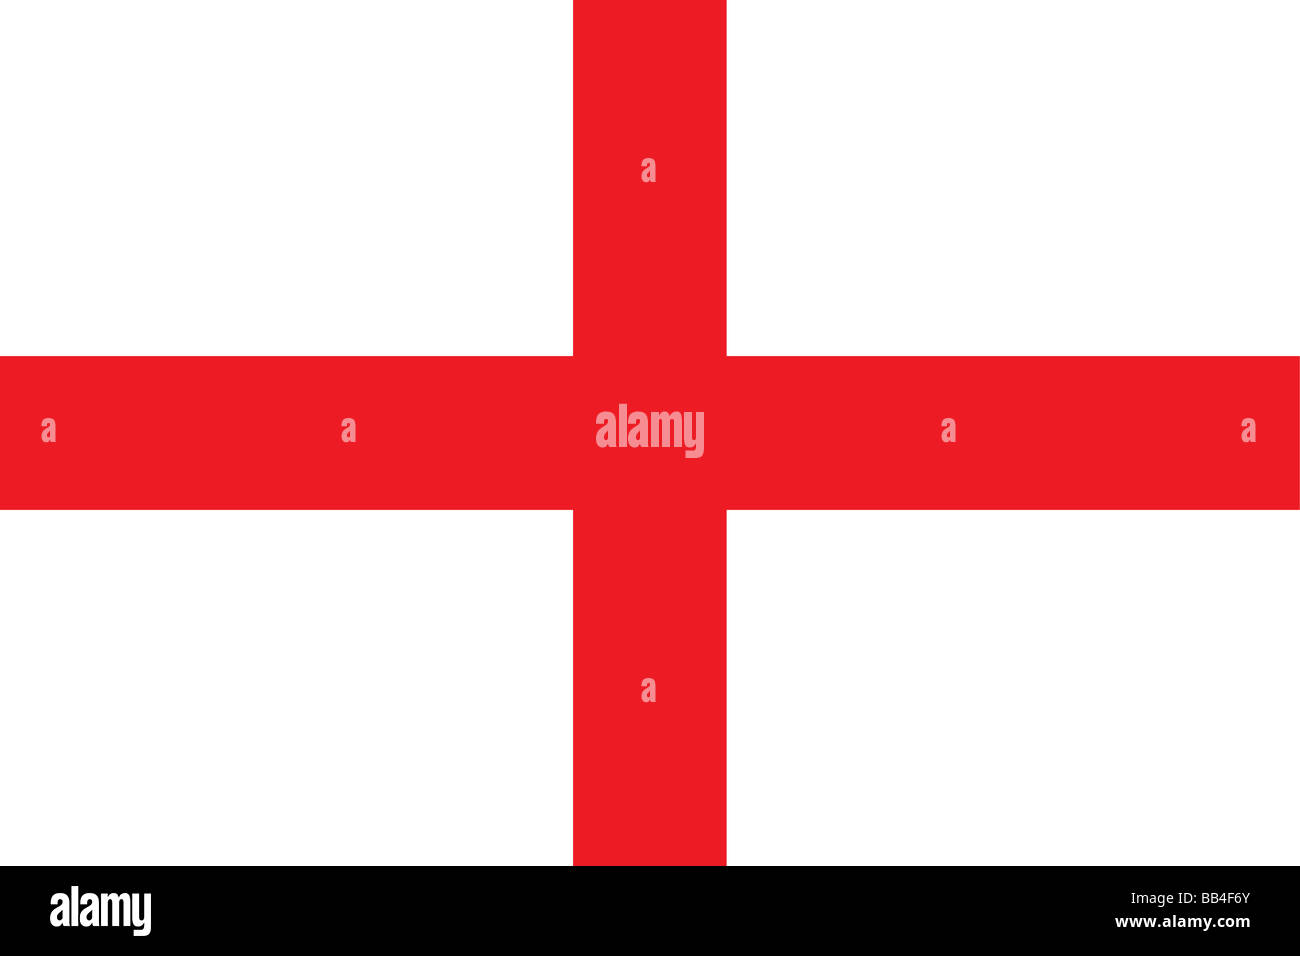 Flag of England, the predominant constituent unit of the United Kingdom, occupying more than half the island of Great Britain. Stock Photo